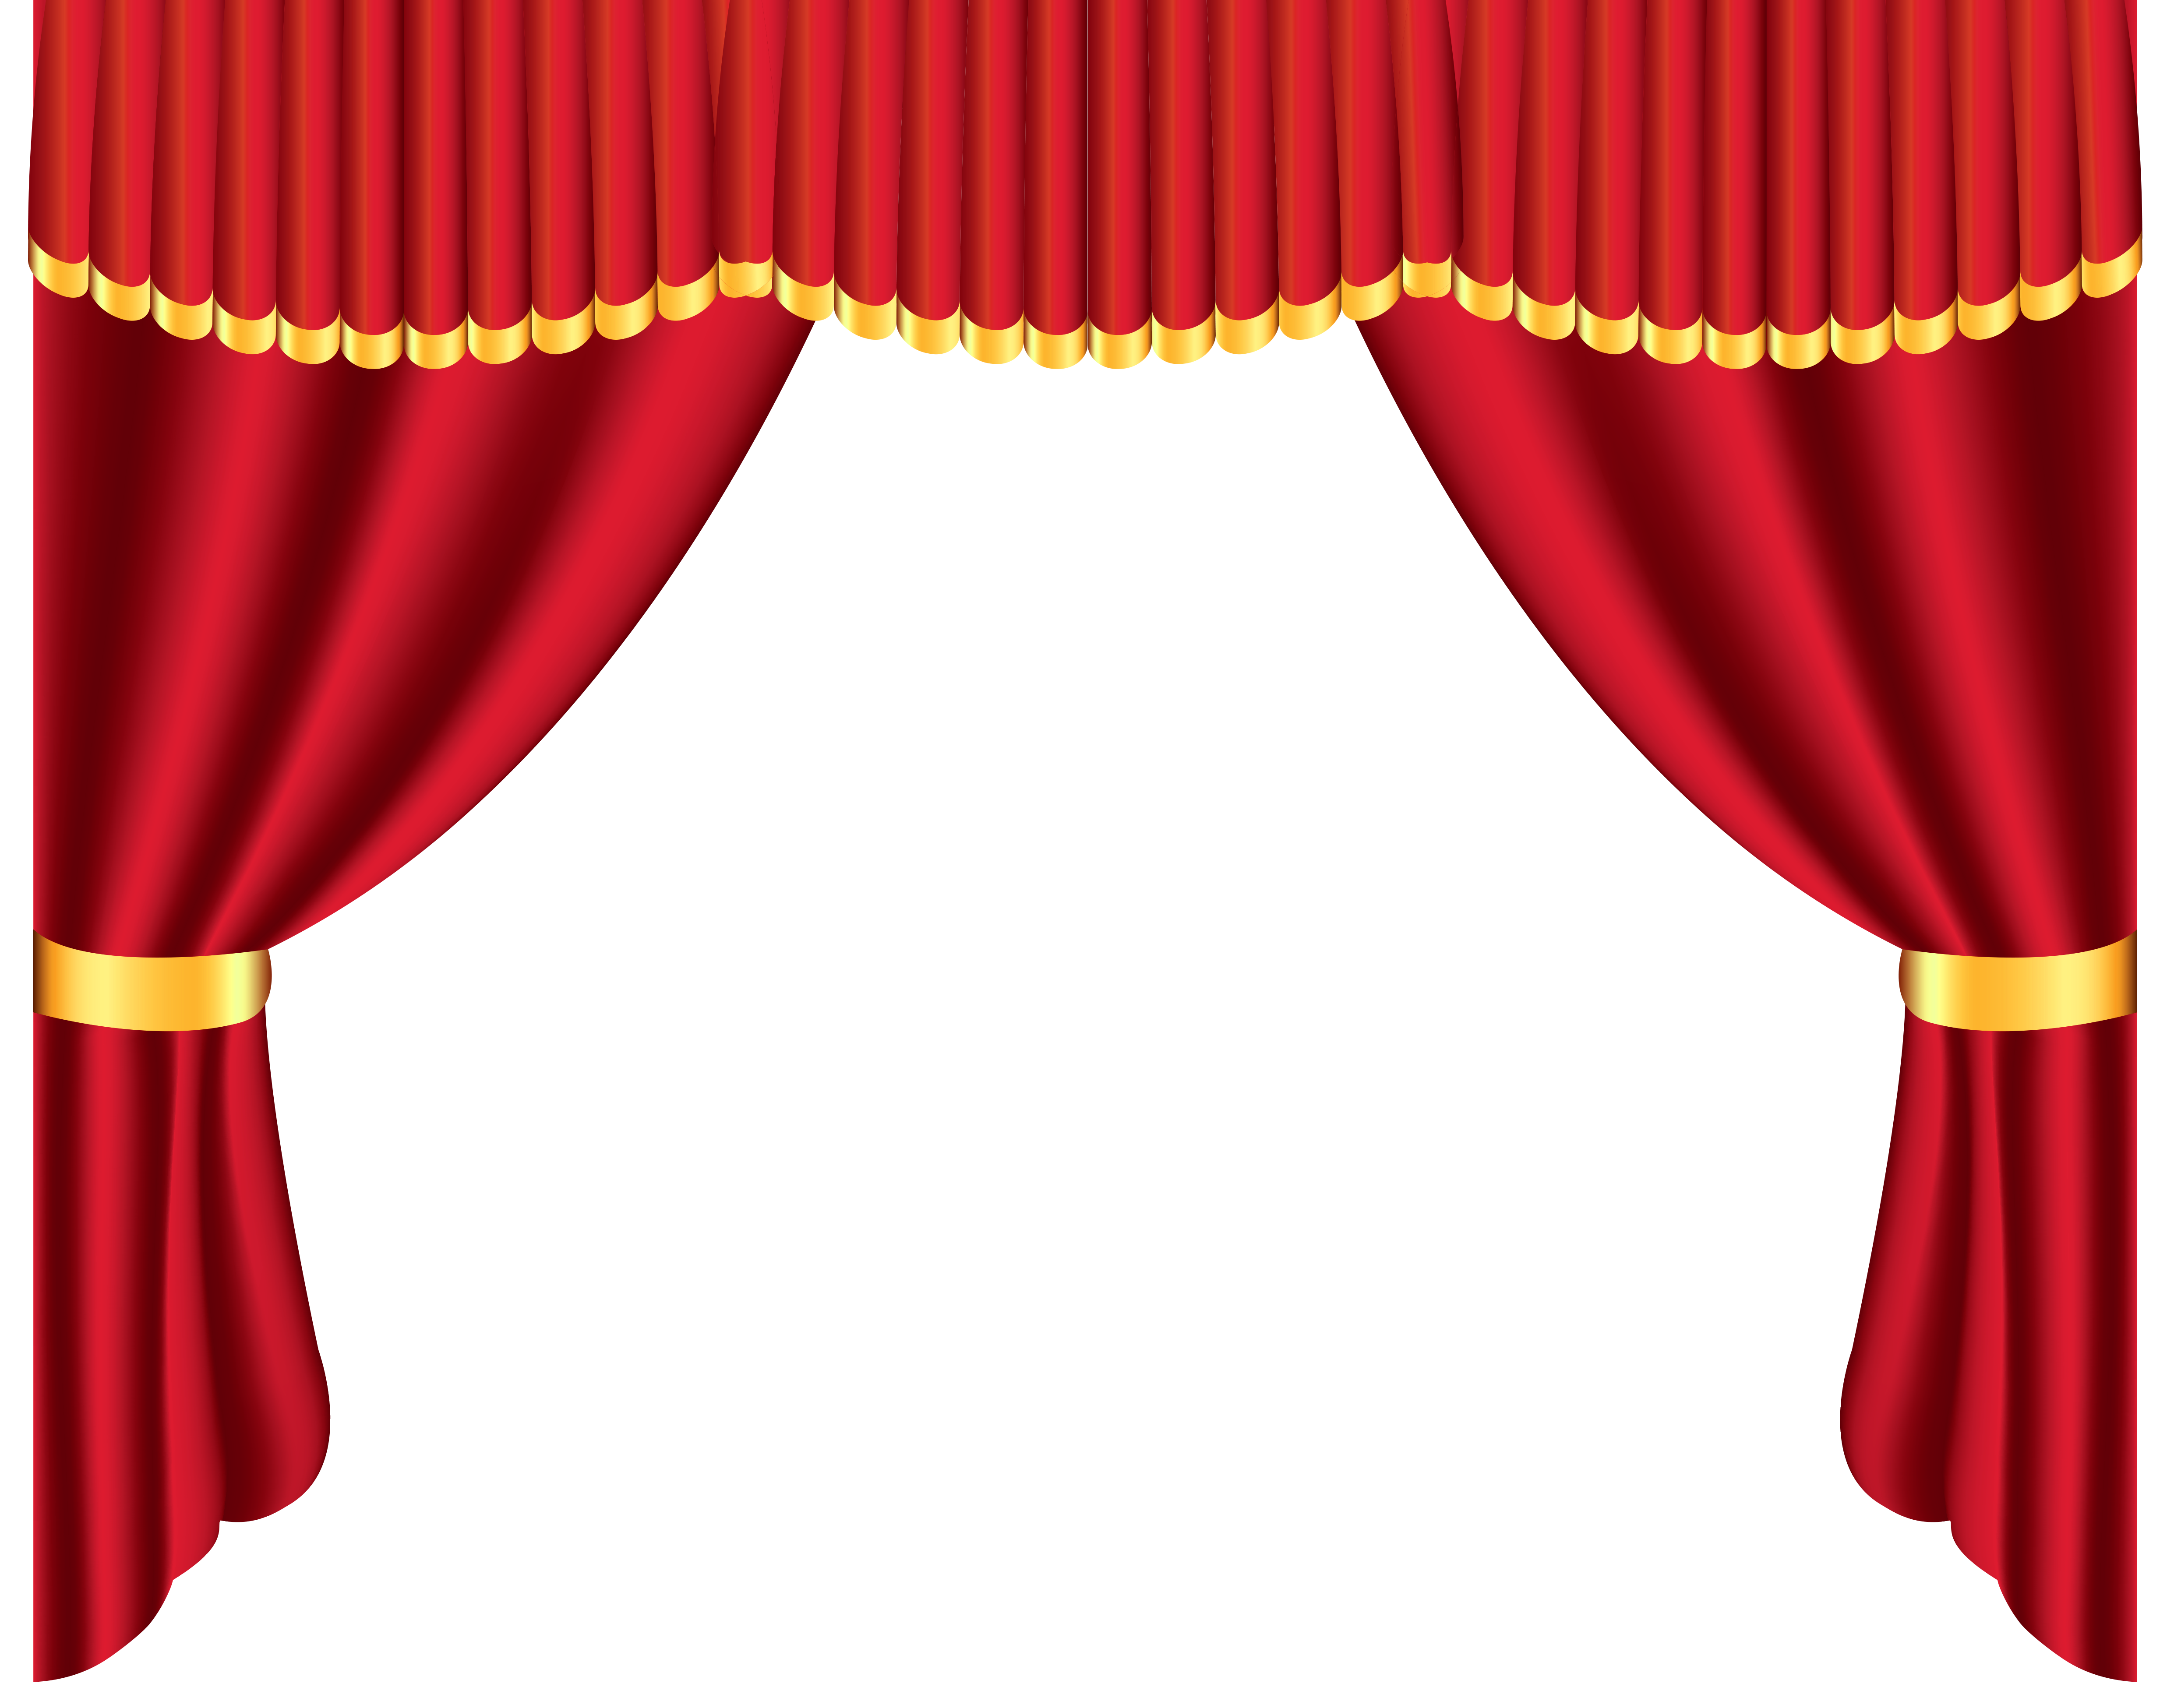 Free Curtain Cliparts, Download Free Clip Art, Free Clip Art.